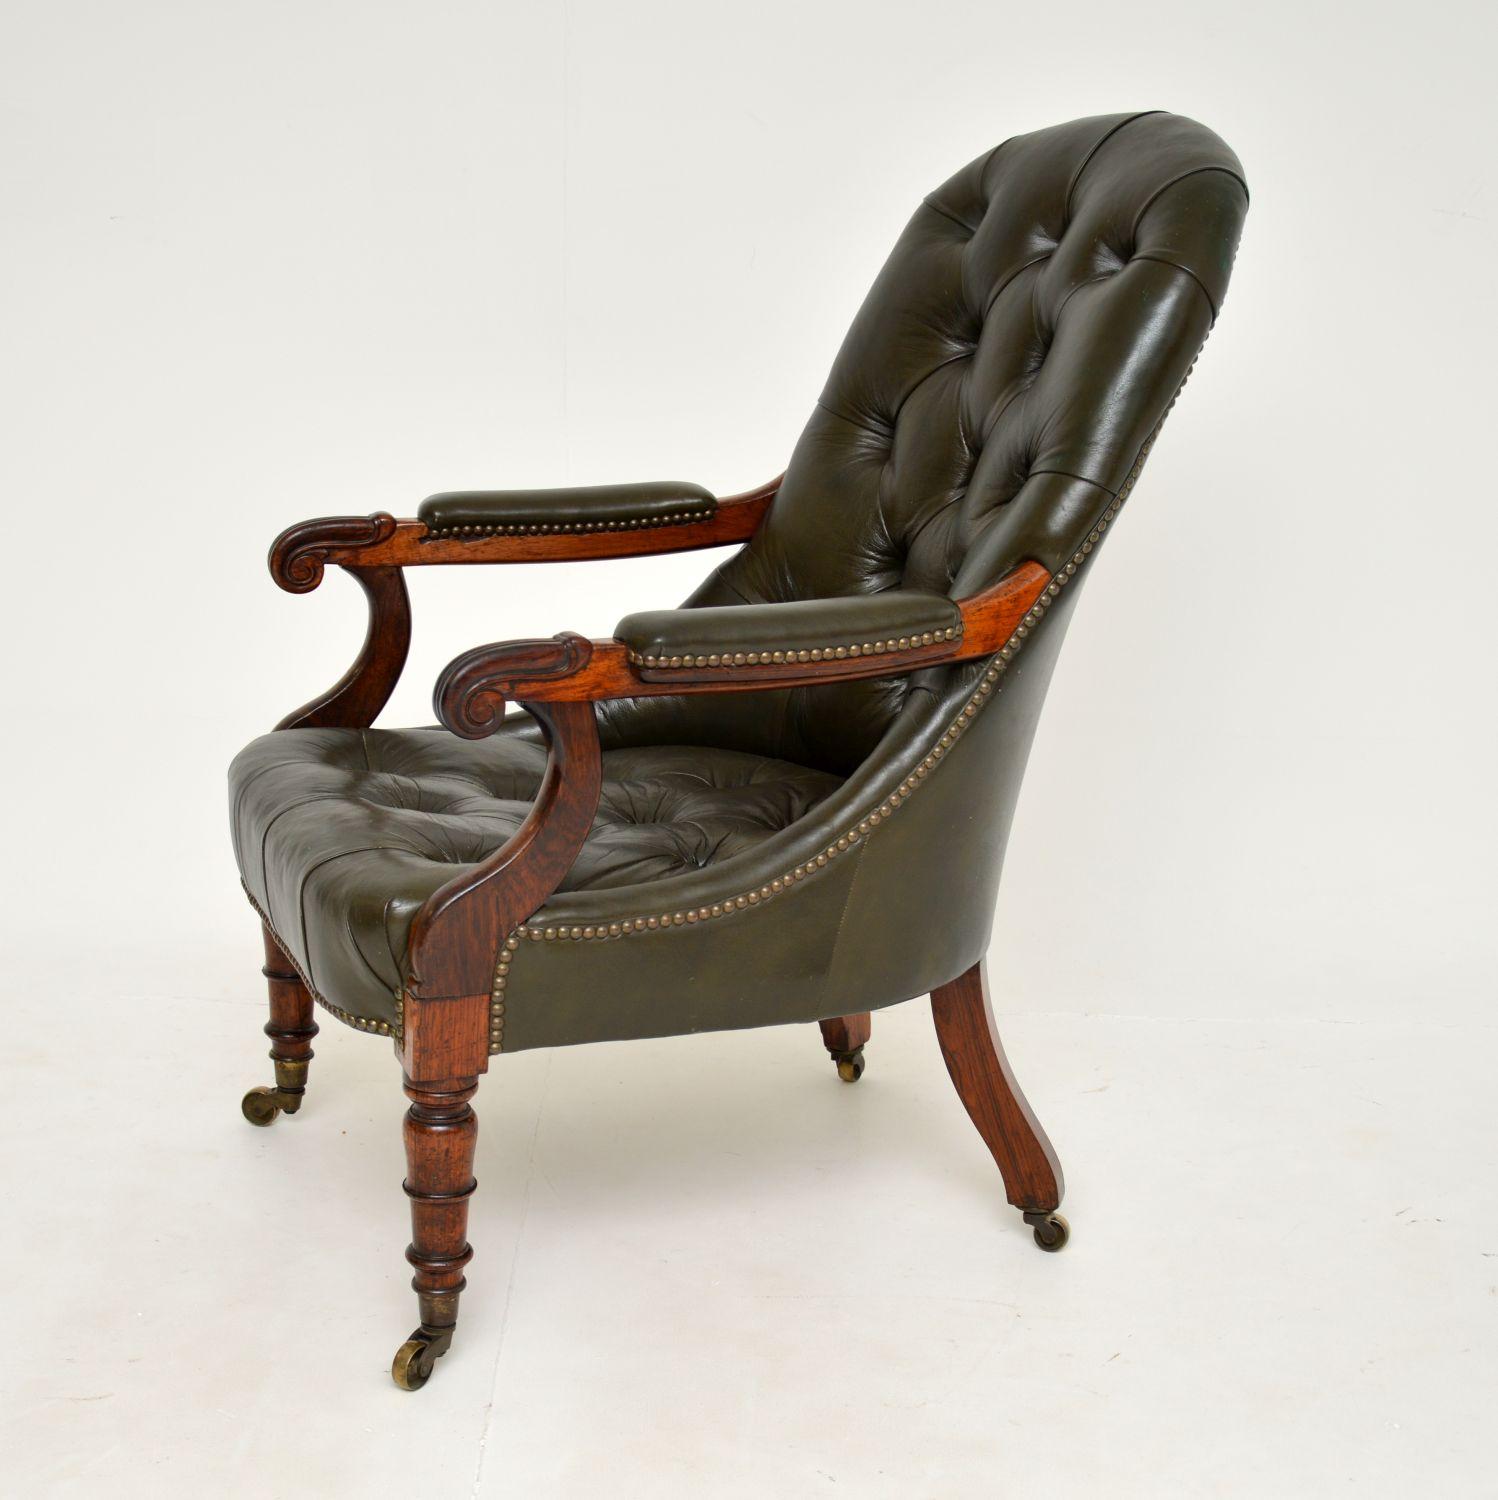 An excellent original antique William IV period spoon back armchair in solid wood and leather. This was made in England, it dates from around the 1830-40’s period.

It is of super quality, with fine carving and beautiful deep buttoned leather